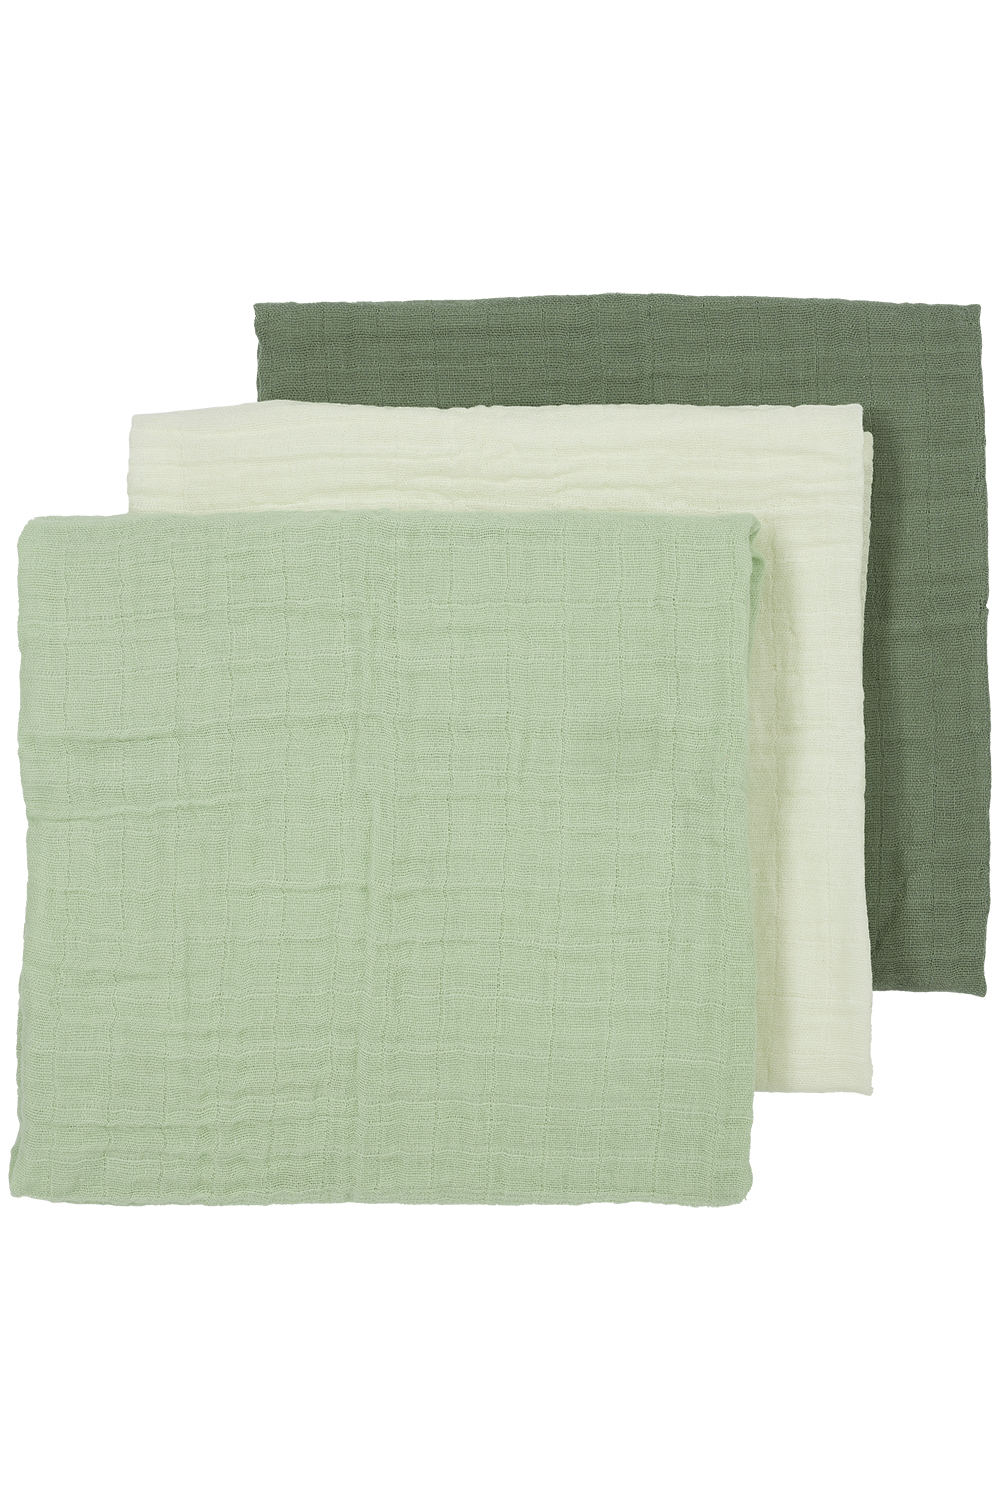 Pre-washed Musselin Mullwindeln 3er pack Uni - offwhite/soft green/forest green - 70x70cm